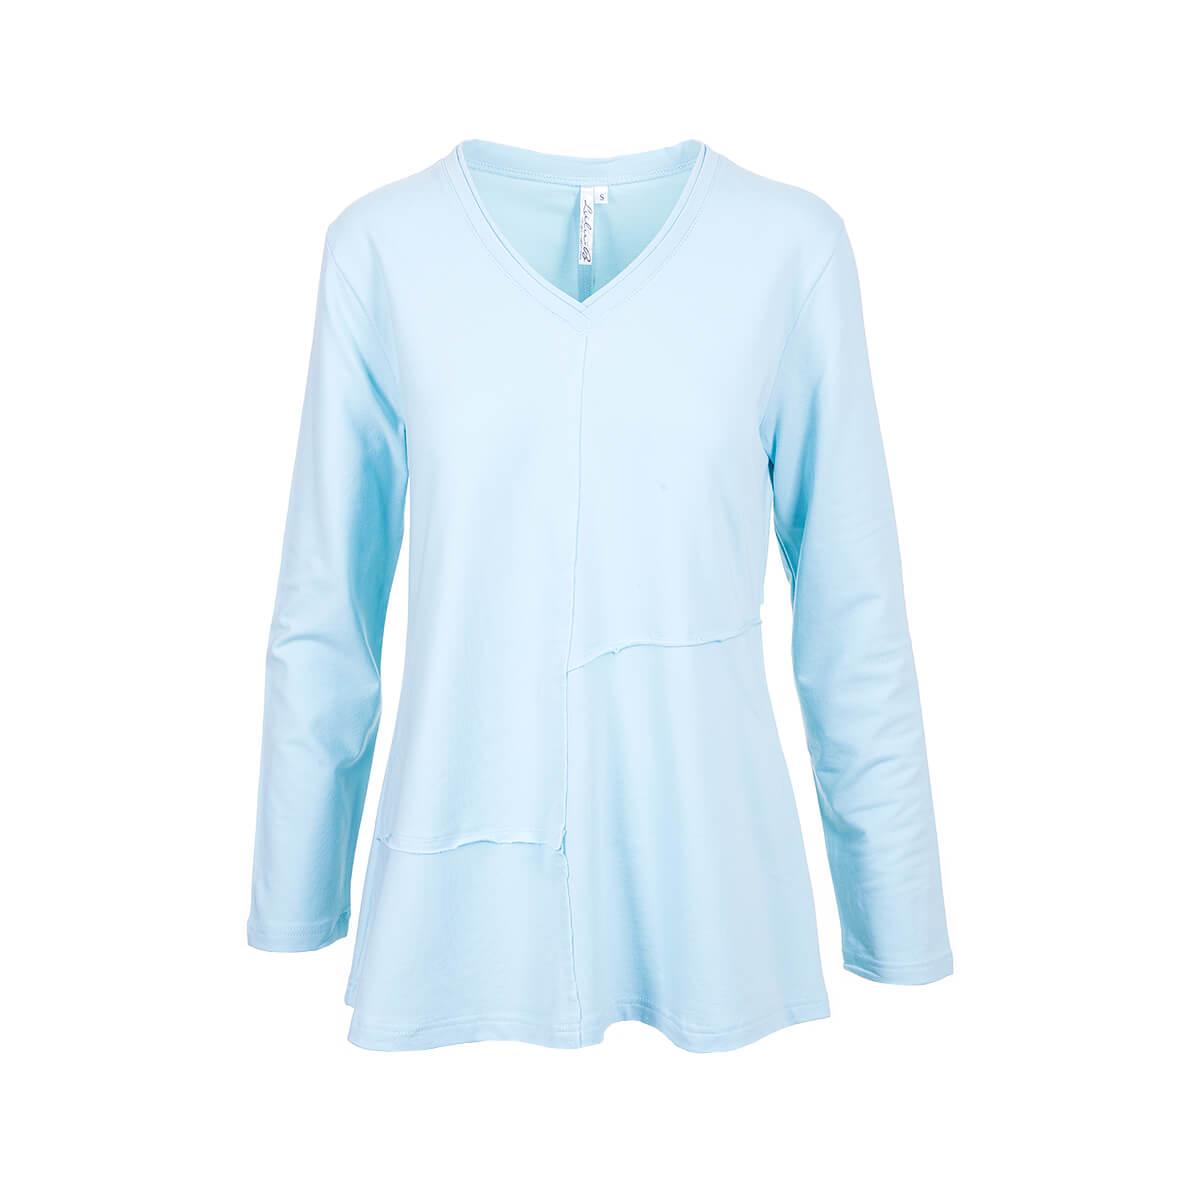  Women's Layered V Neck Top